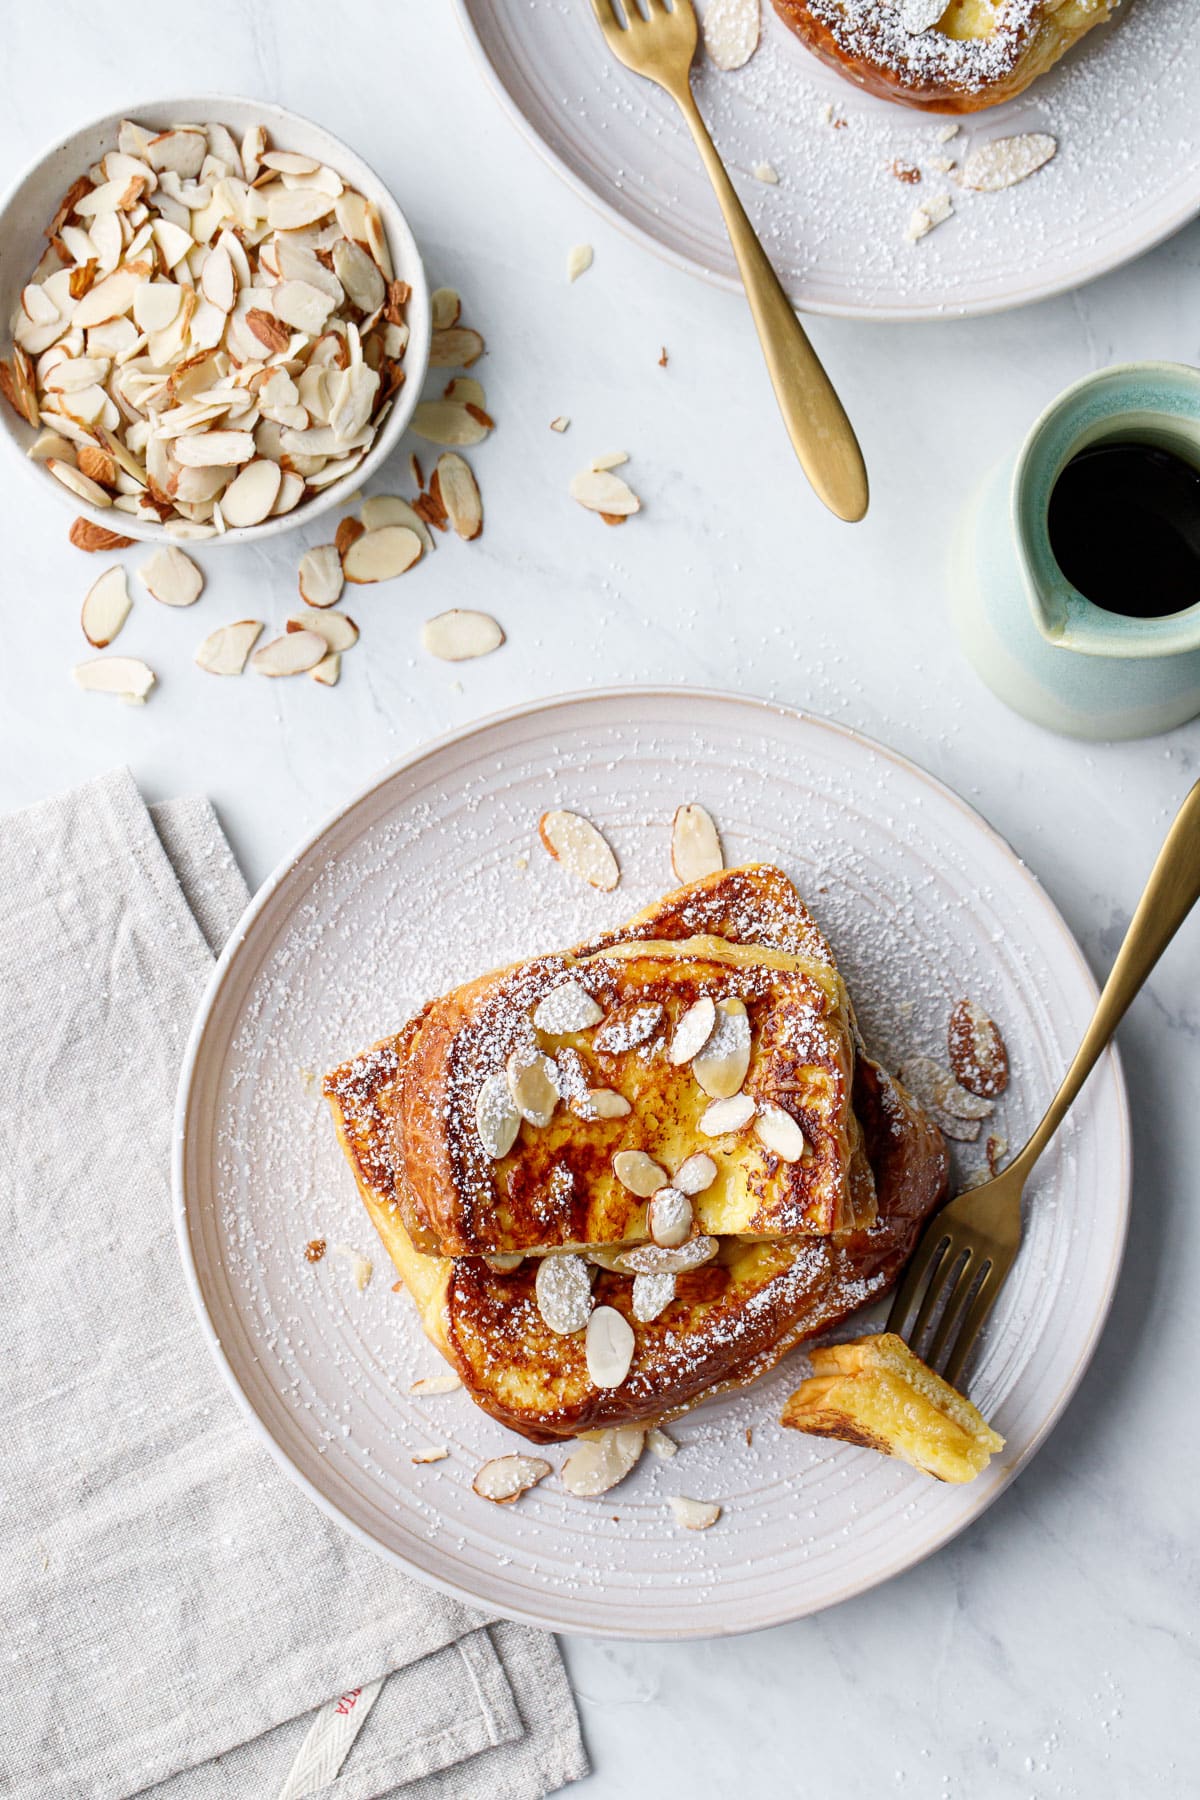 Overhead, plates with Marzipan-Stuffed French Toast and a bowl of almonds and pitcher of maple syrup.